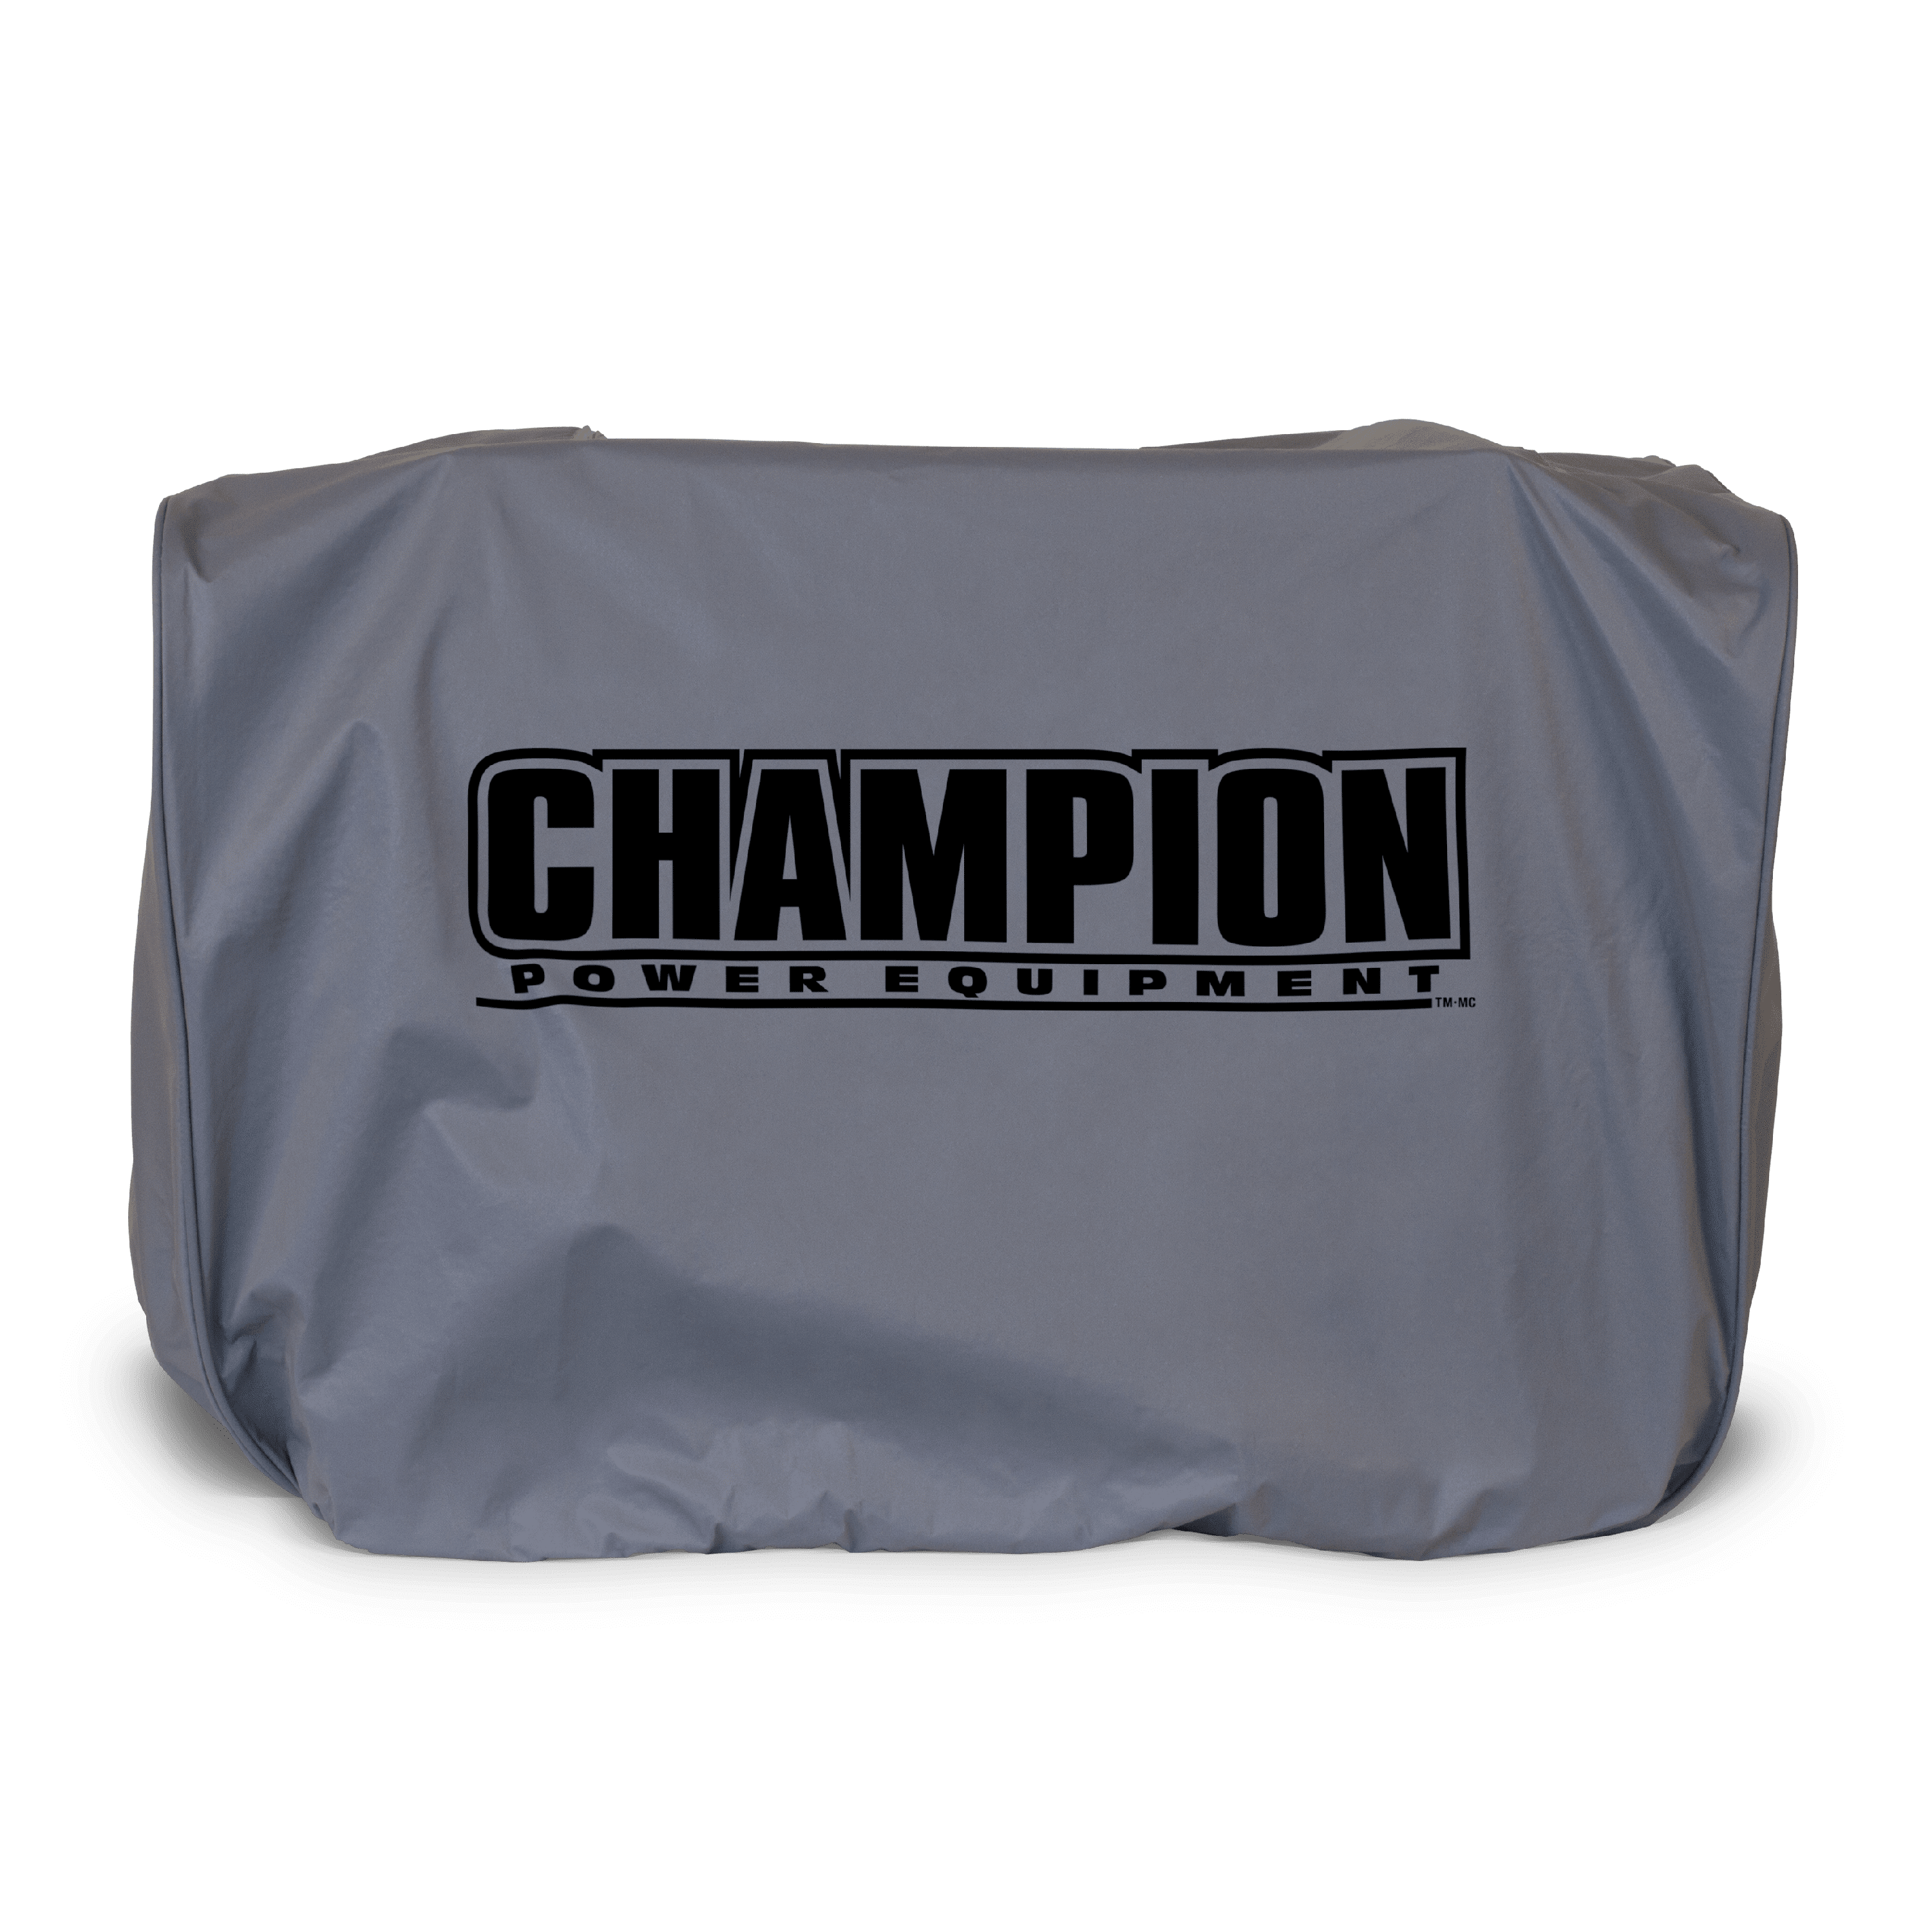 26.4 x 18.9 x 18.1 inches Champion Power Equipment Weather-Resistant Storage Cover for 3100-Watt or Higher Inverter Generators 